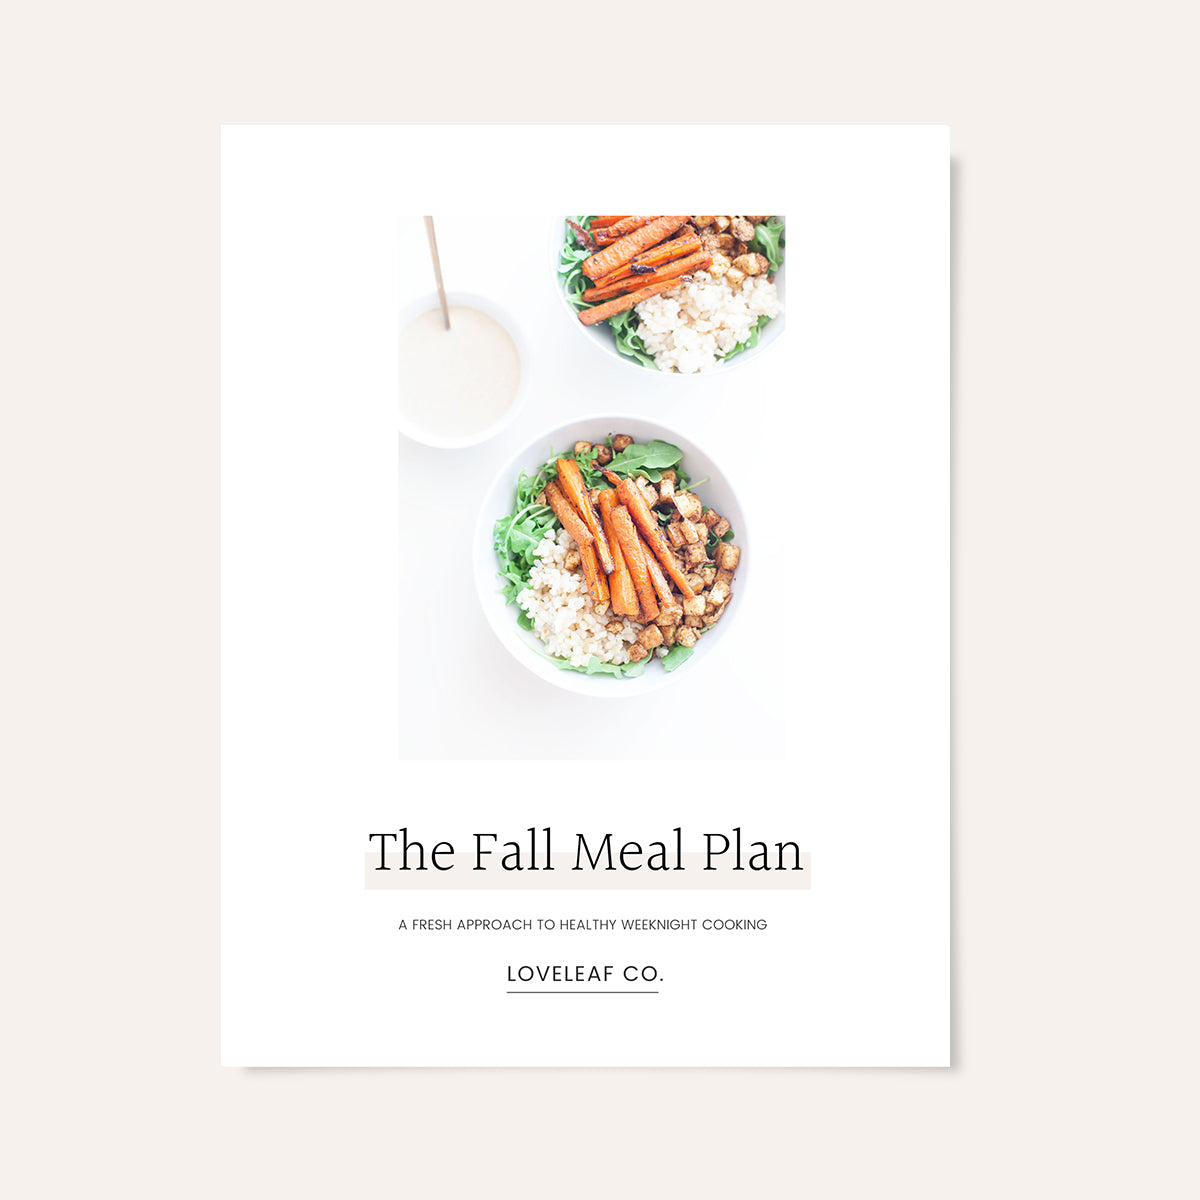 The Fall Meal Plan